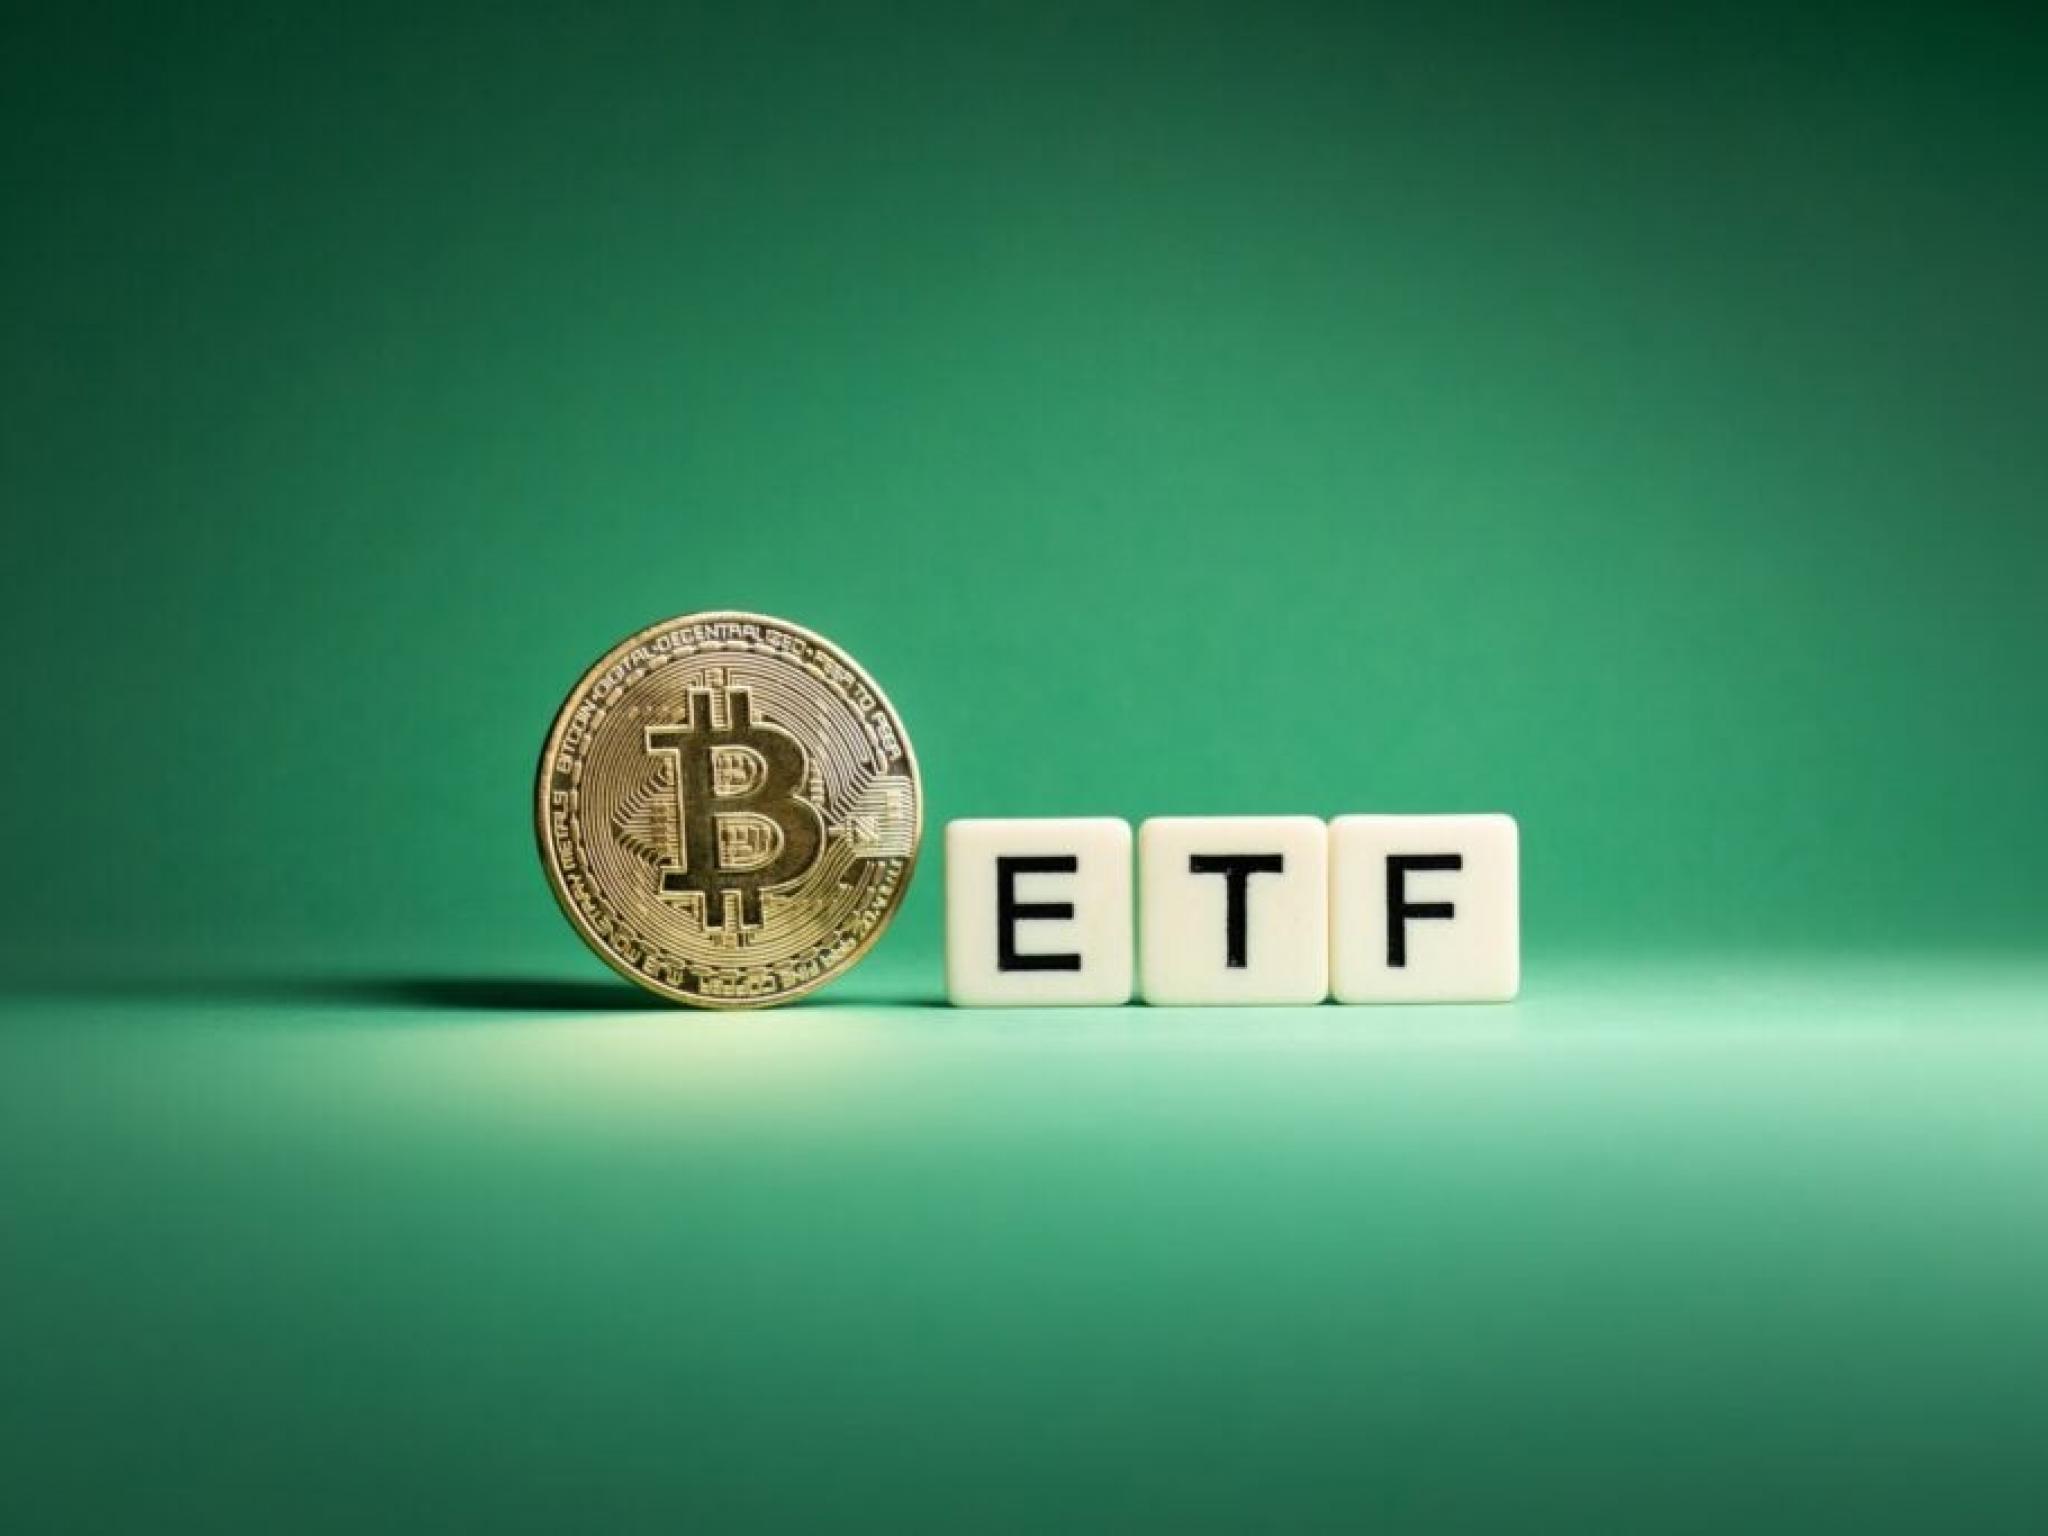  bitcoin-spot-etfs-record-887m-inflow-on-wednesday-second-highest-ever 